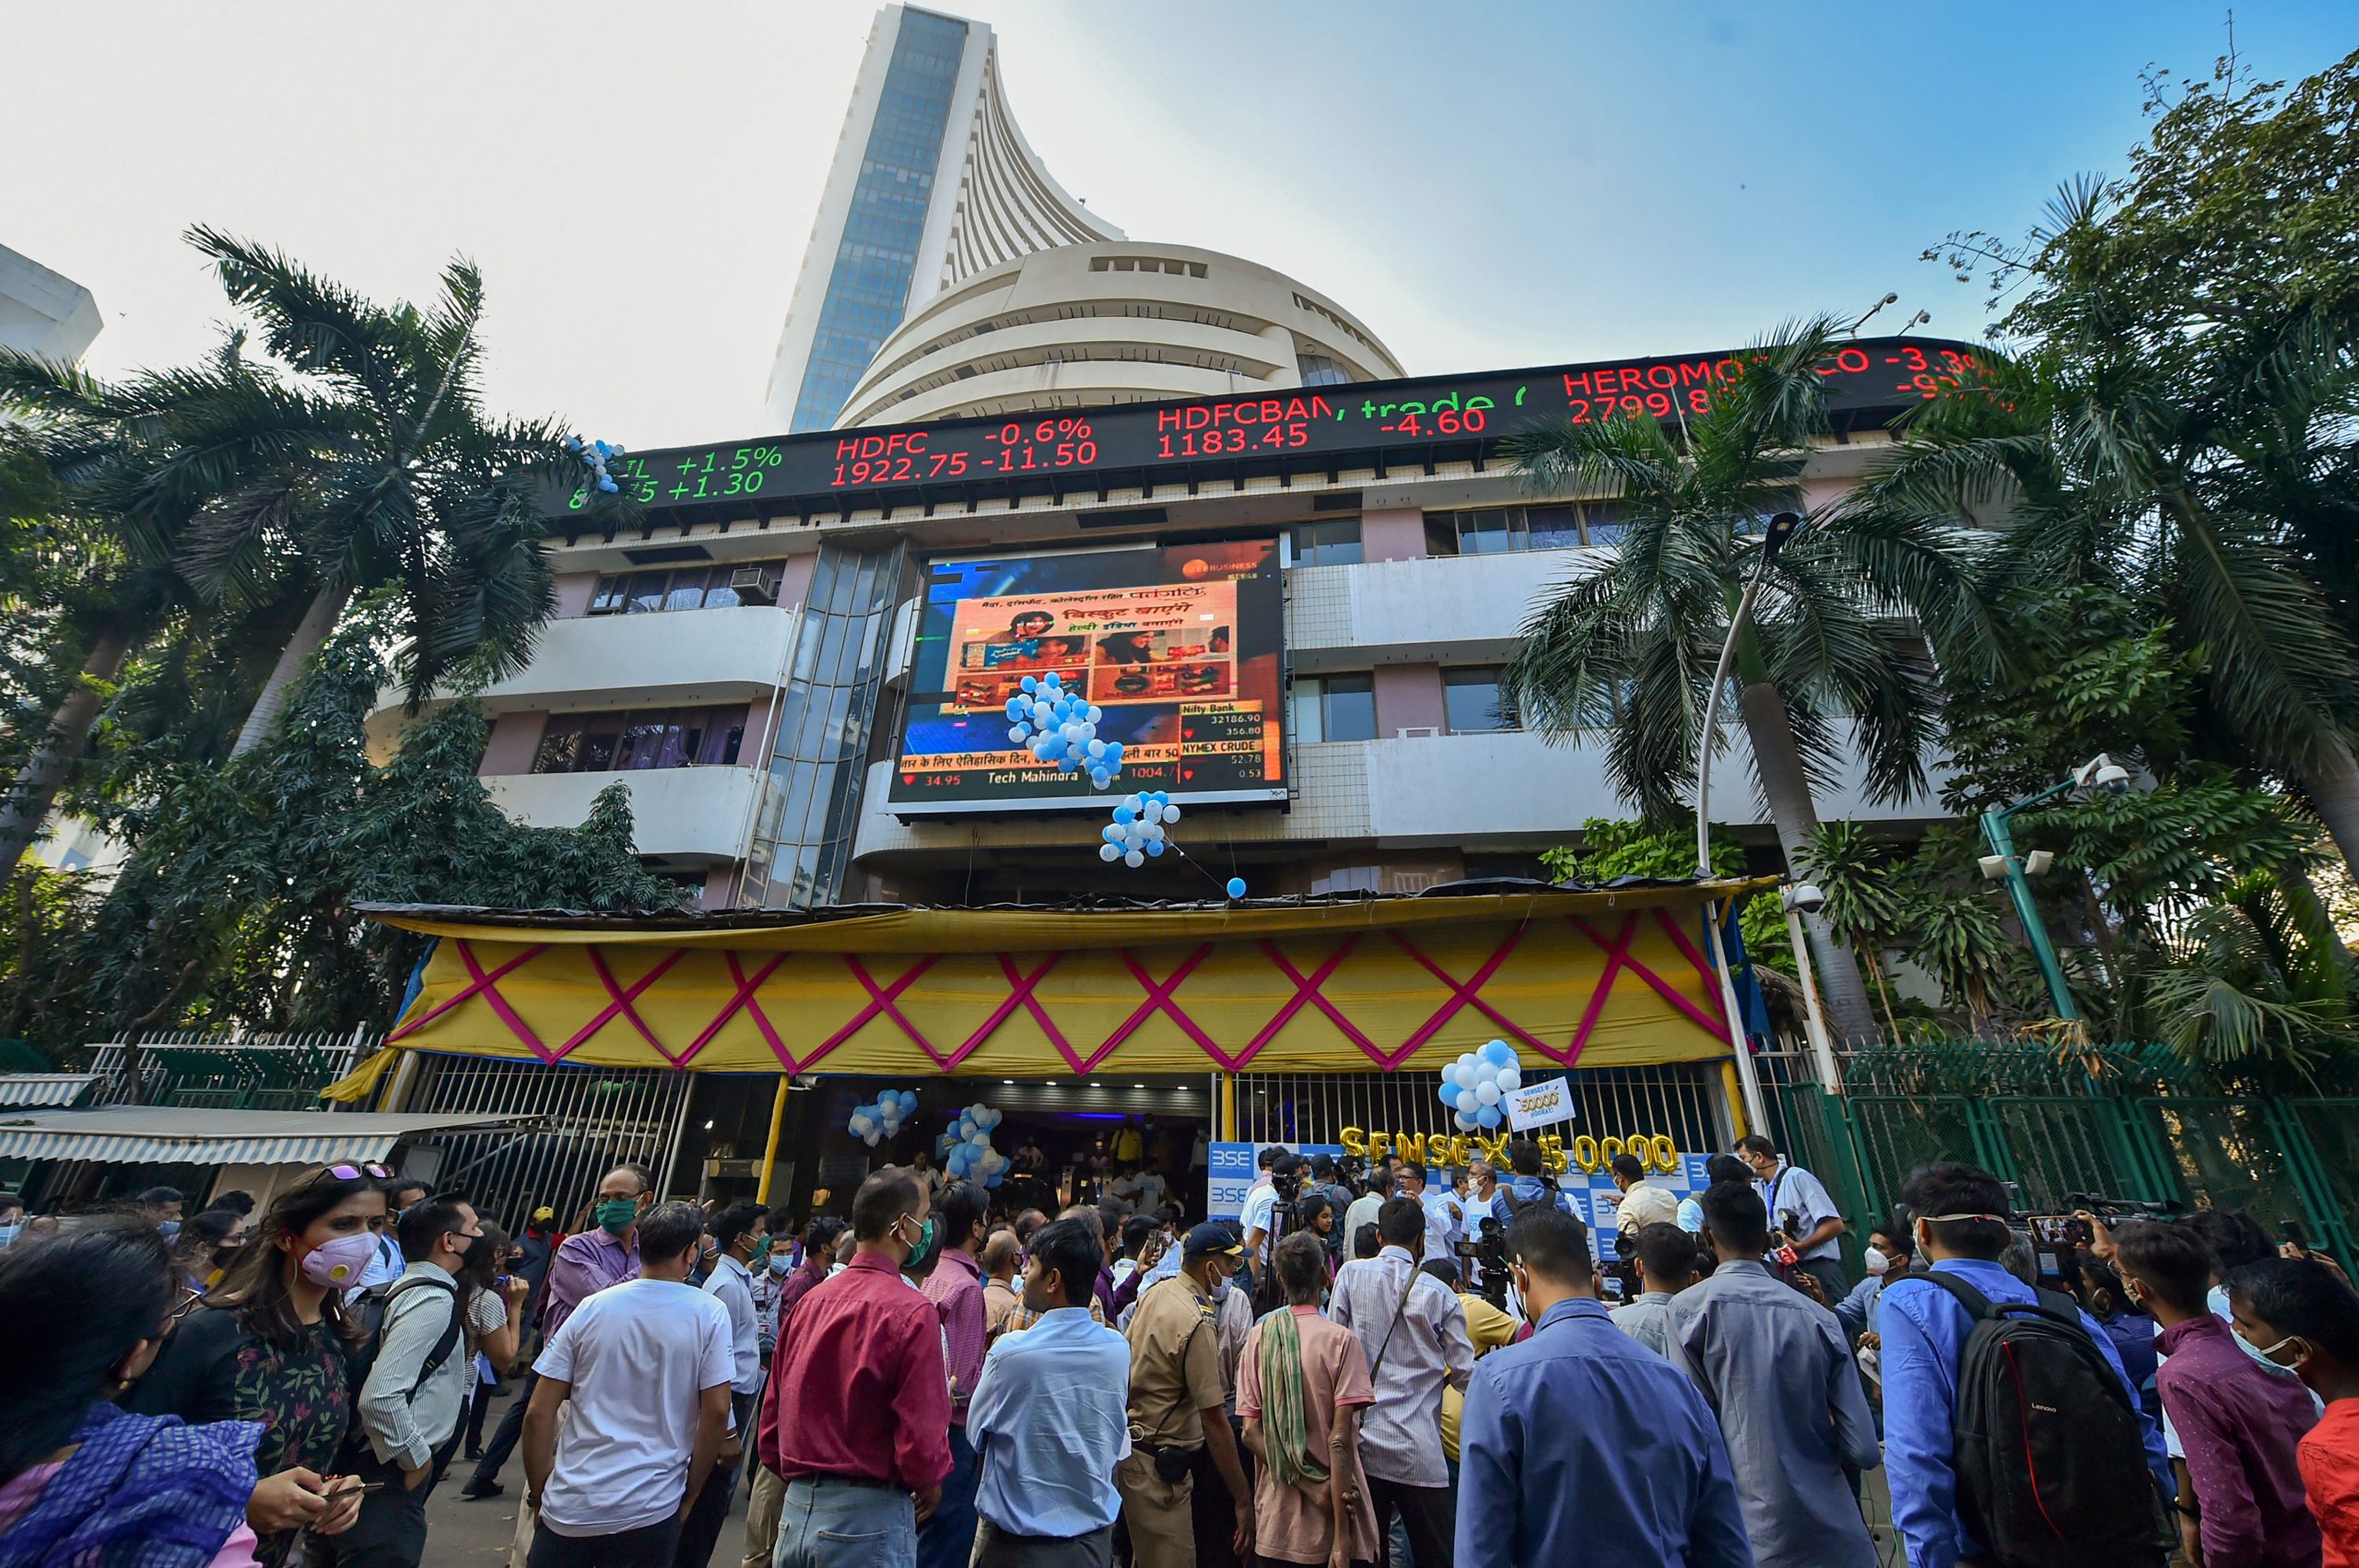 What propelled Sensex past the 55,000 mark